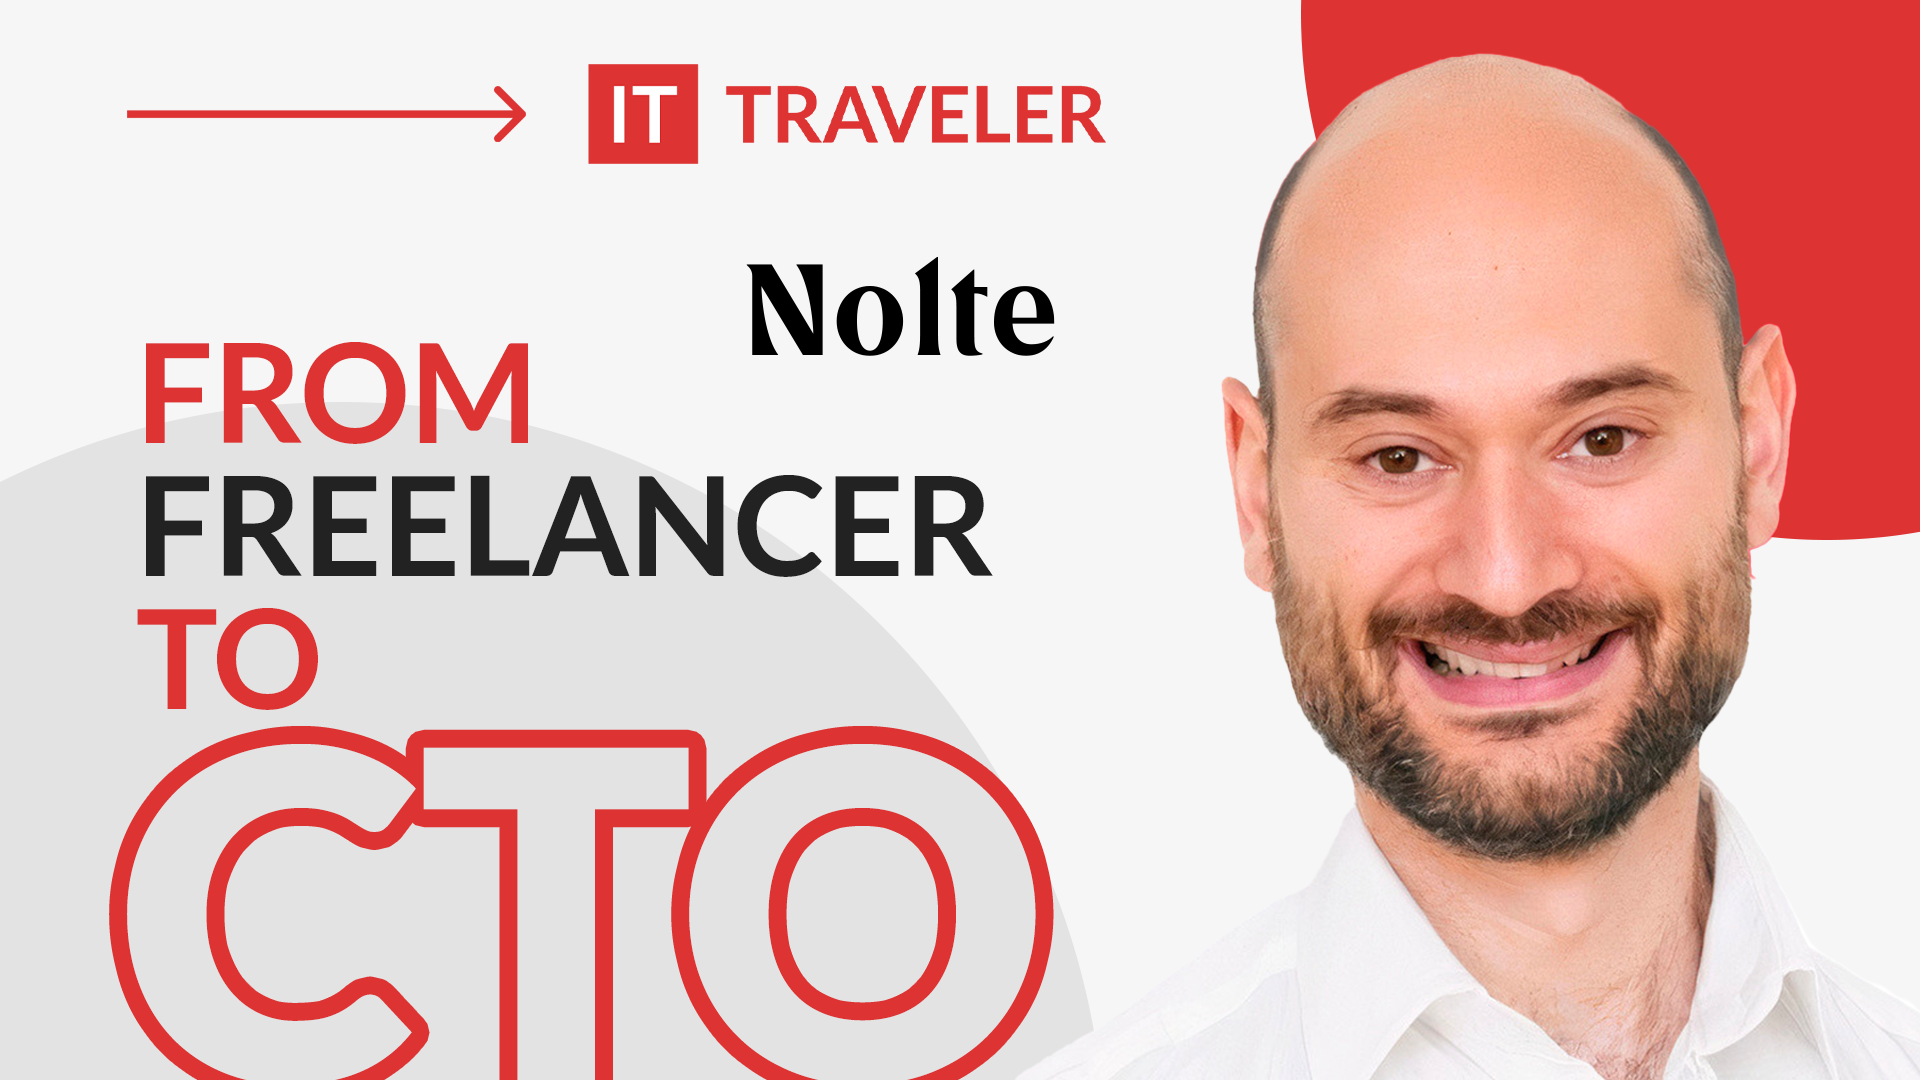 From Freelancer to CTO. Conversation with Adam Fenton, Nolte Co-Founder and CTO